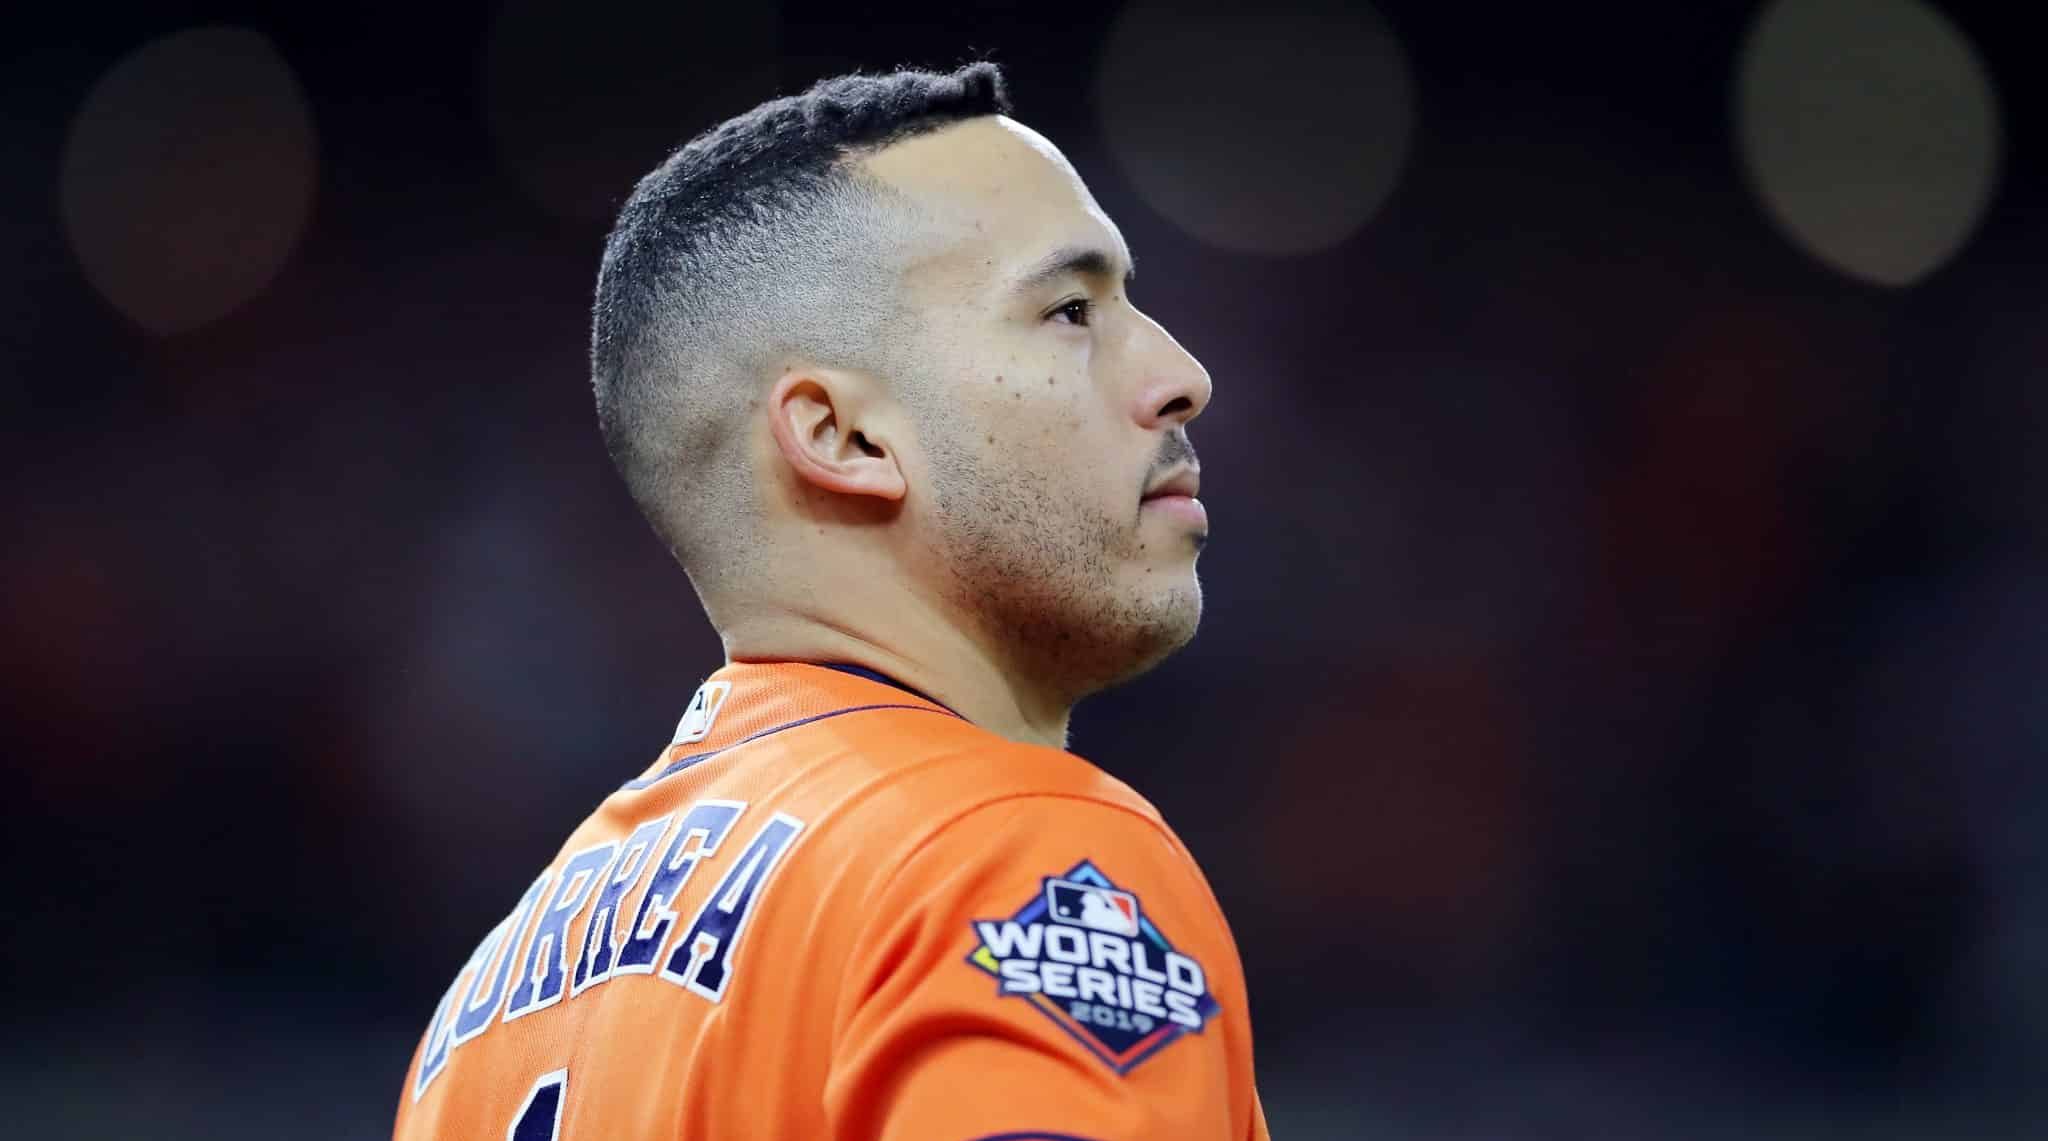 HOUSTON, TEXAS - OCTOBER 30: Carlos Correa #1 of the Houston Astros reacts after hitting an RBI single against the Washington Nationals during the fifth inning in Game Seven of the 2019 World Series at Minute Maid Park on October 30, 2019 in Houston, Texas.